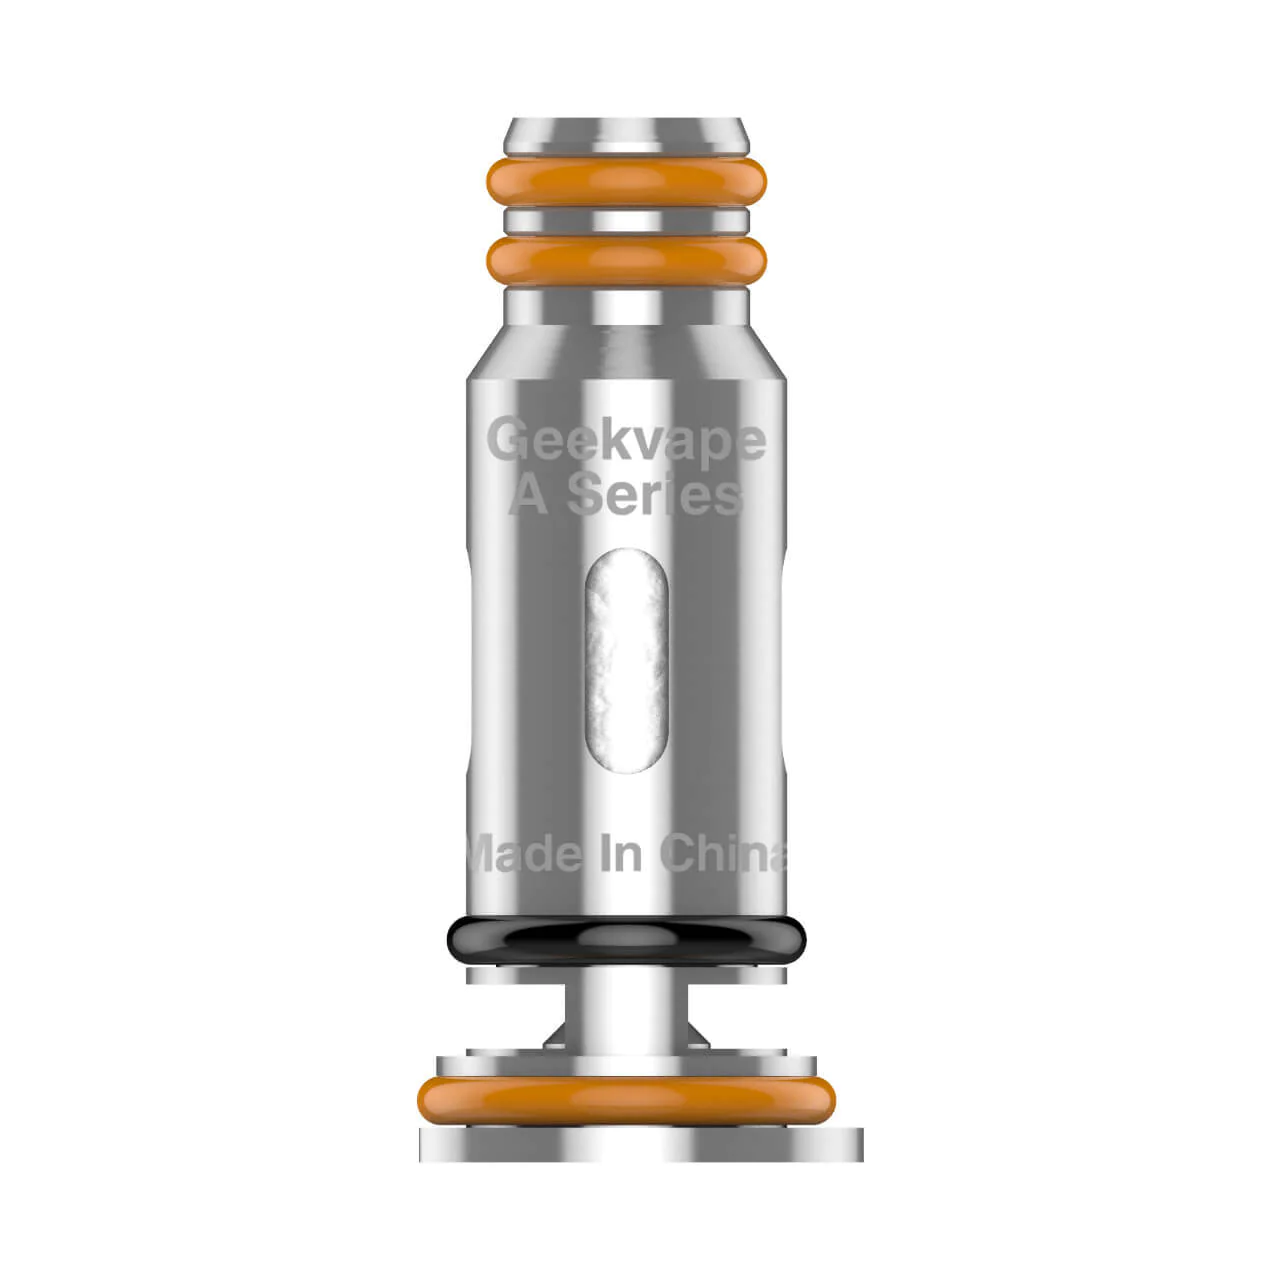 GeekVape_A_Series_Replacement_Coil__14511.1632498653_1500x